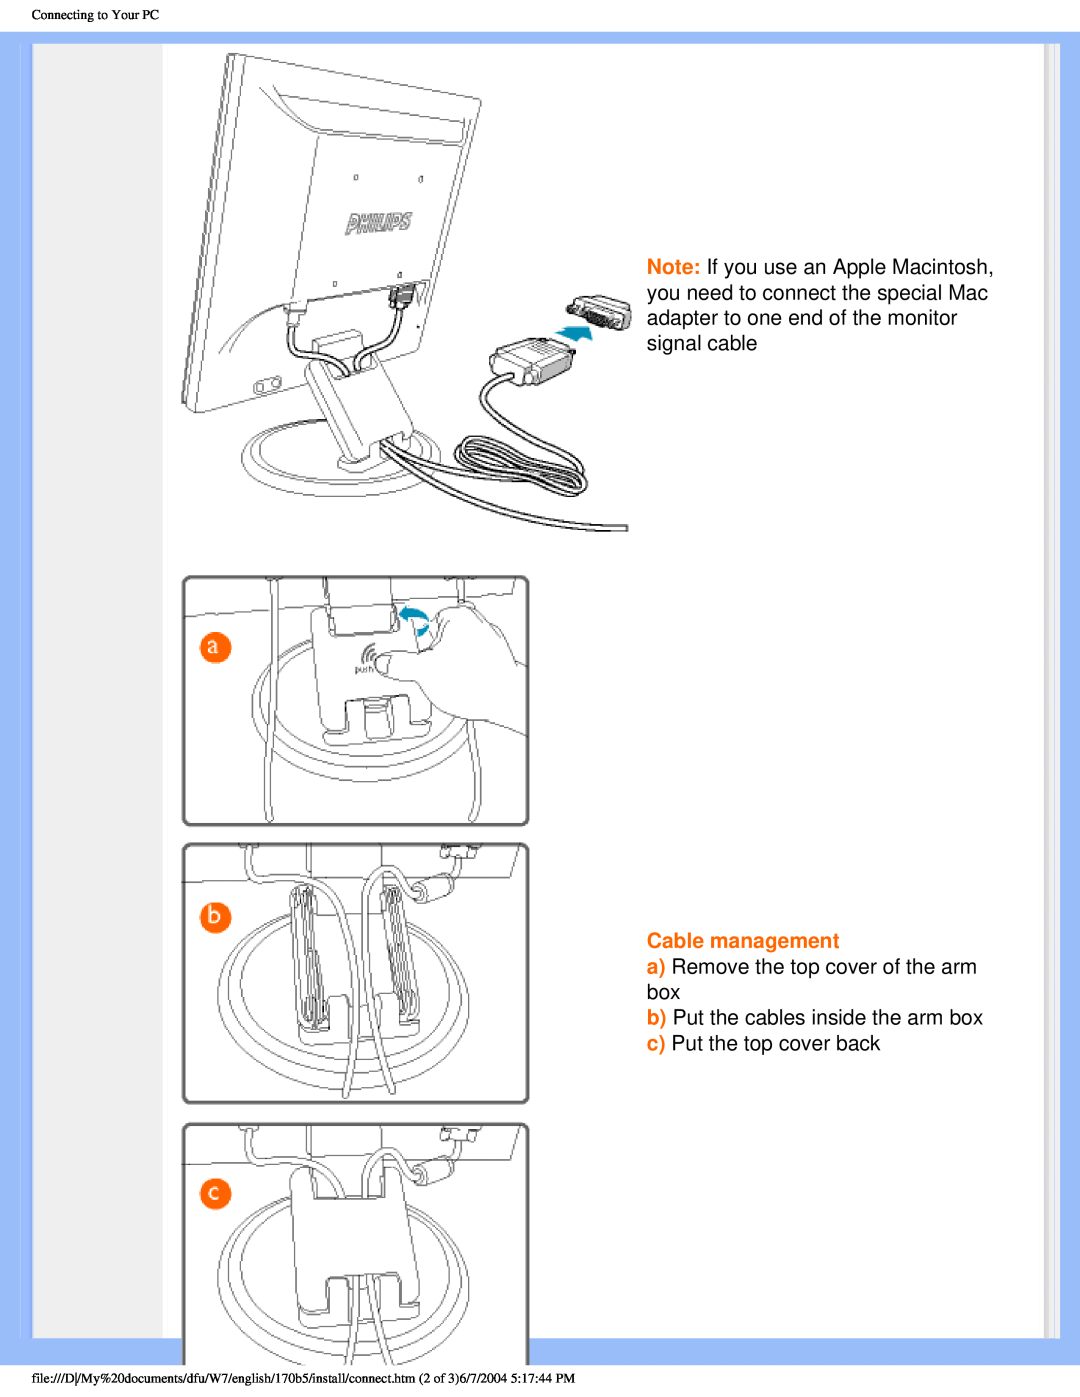 Philips 170B5 user manual Cable management 